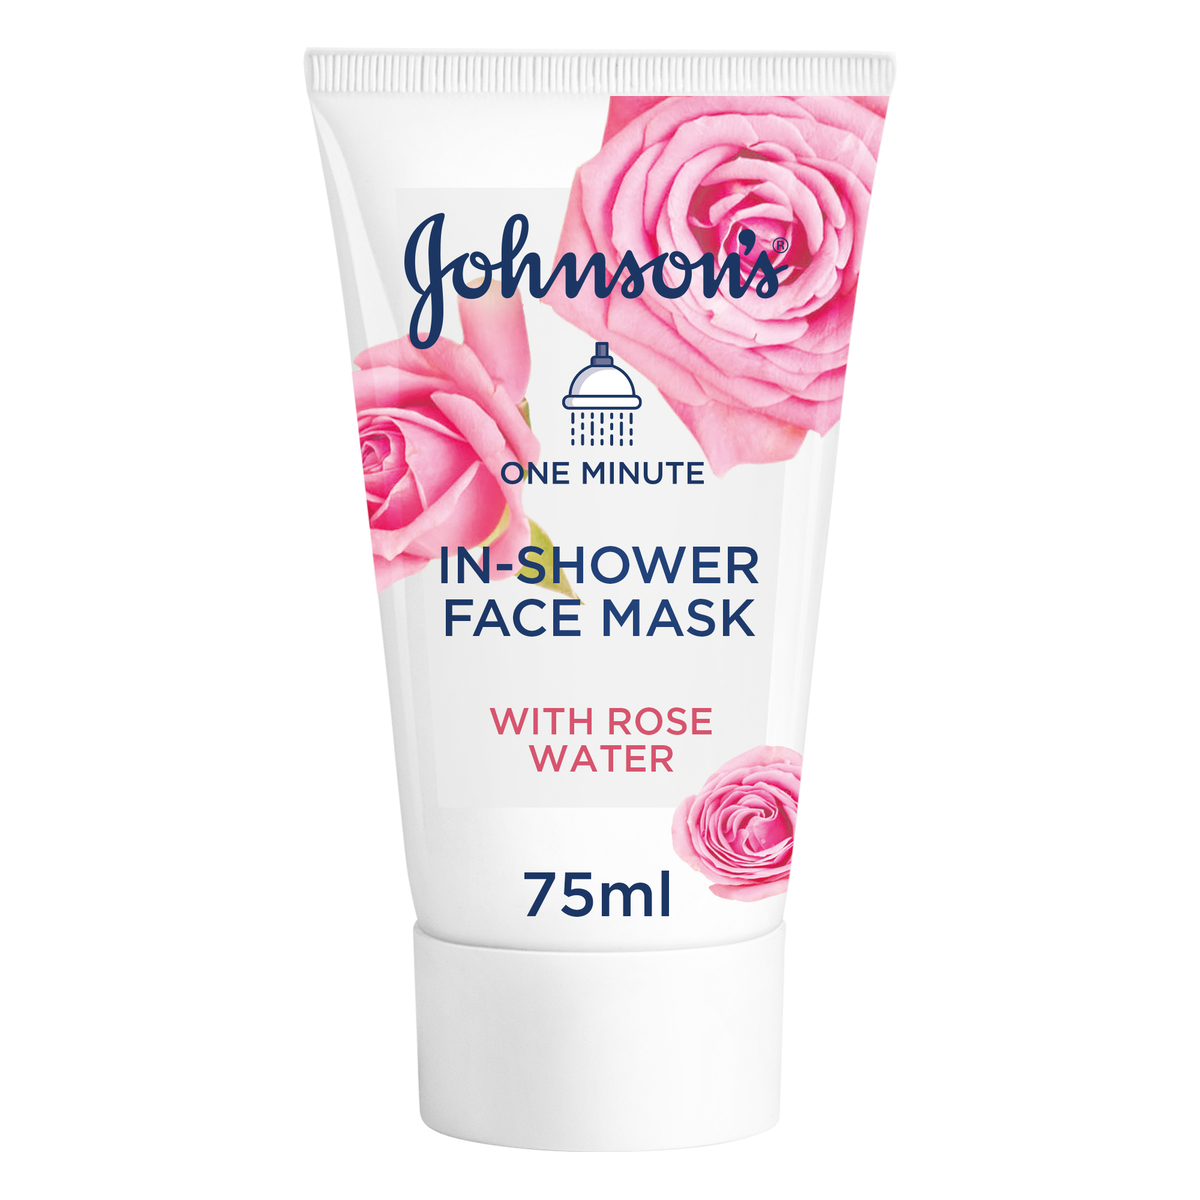 Johnson's Facial Mask 1 Minute In-Shower Face Mask with Rose Water 75 ml